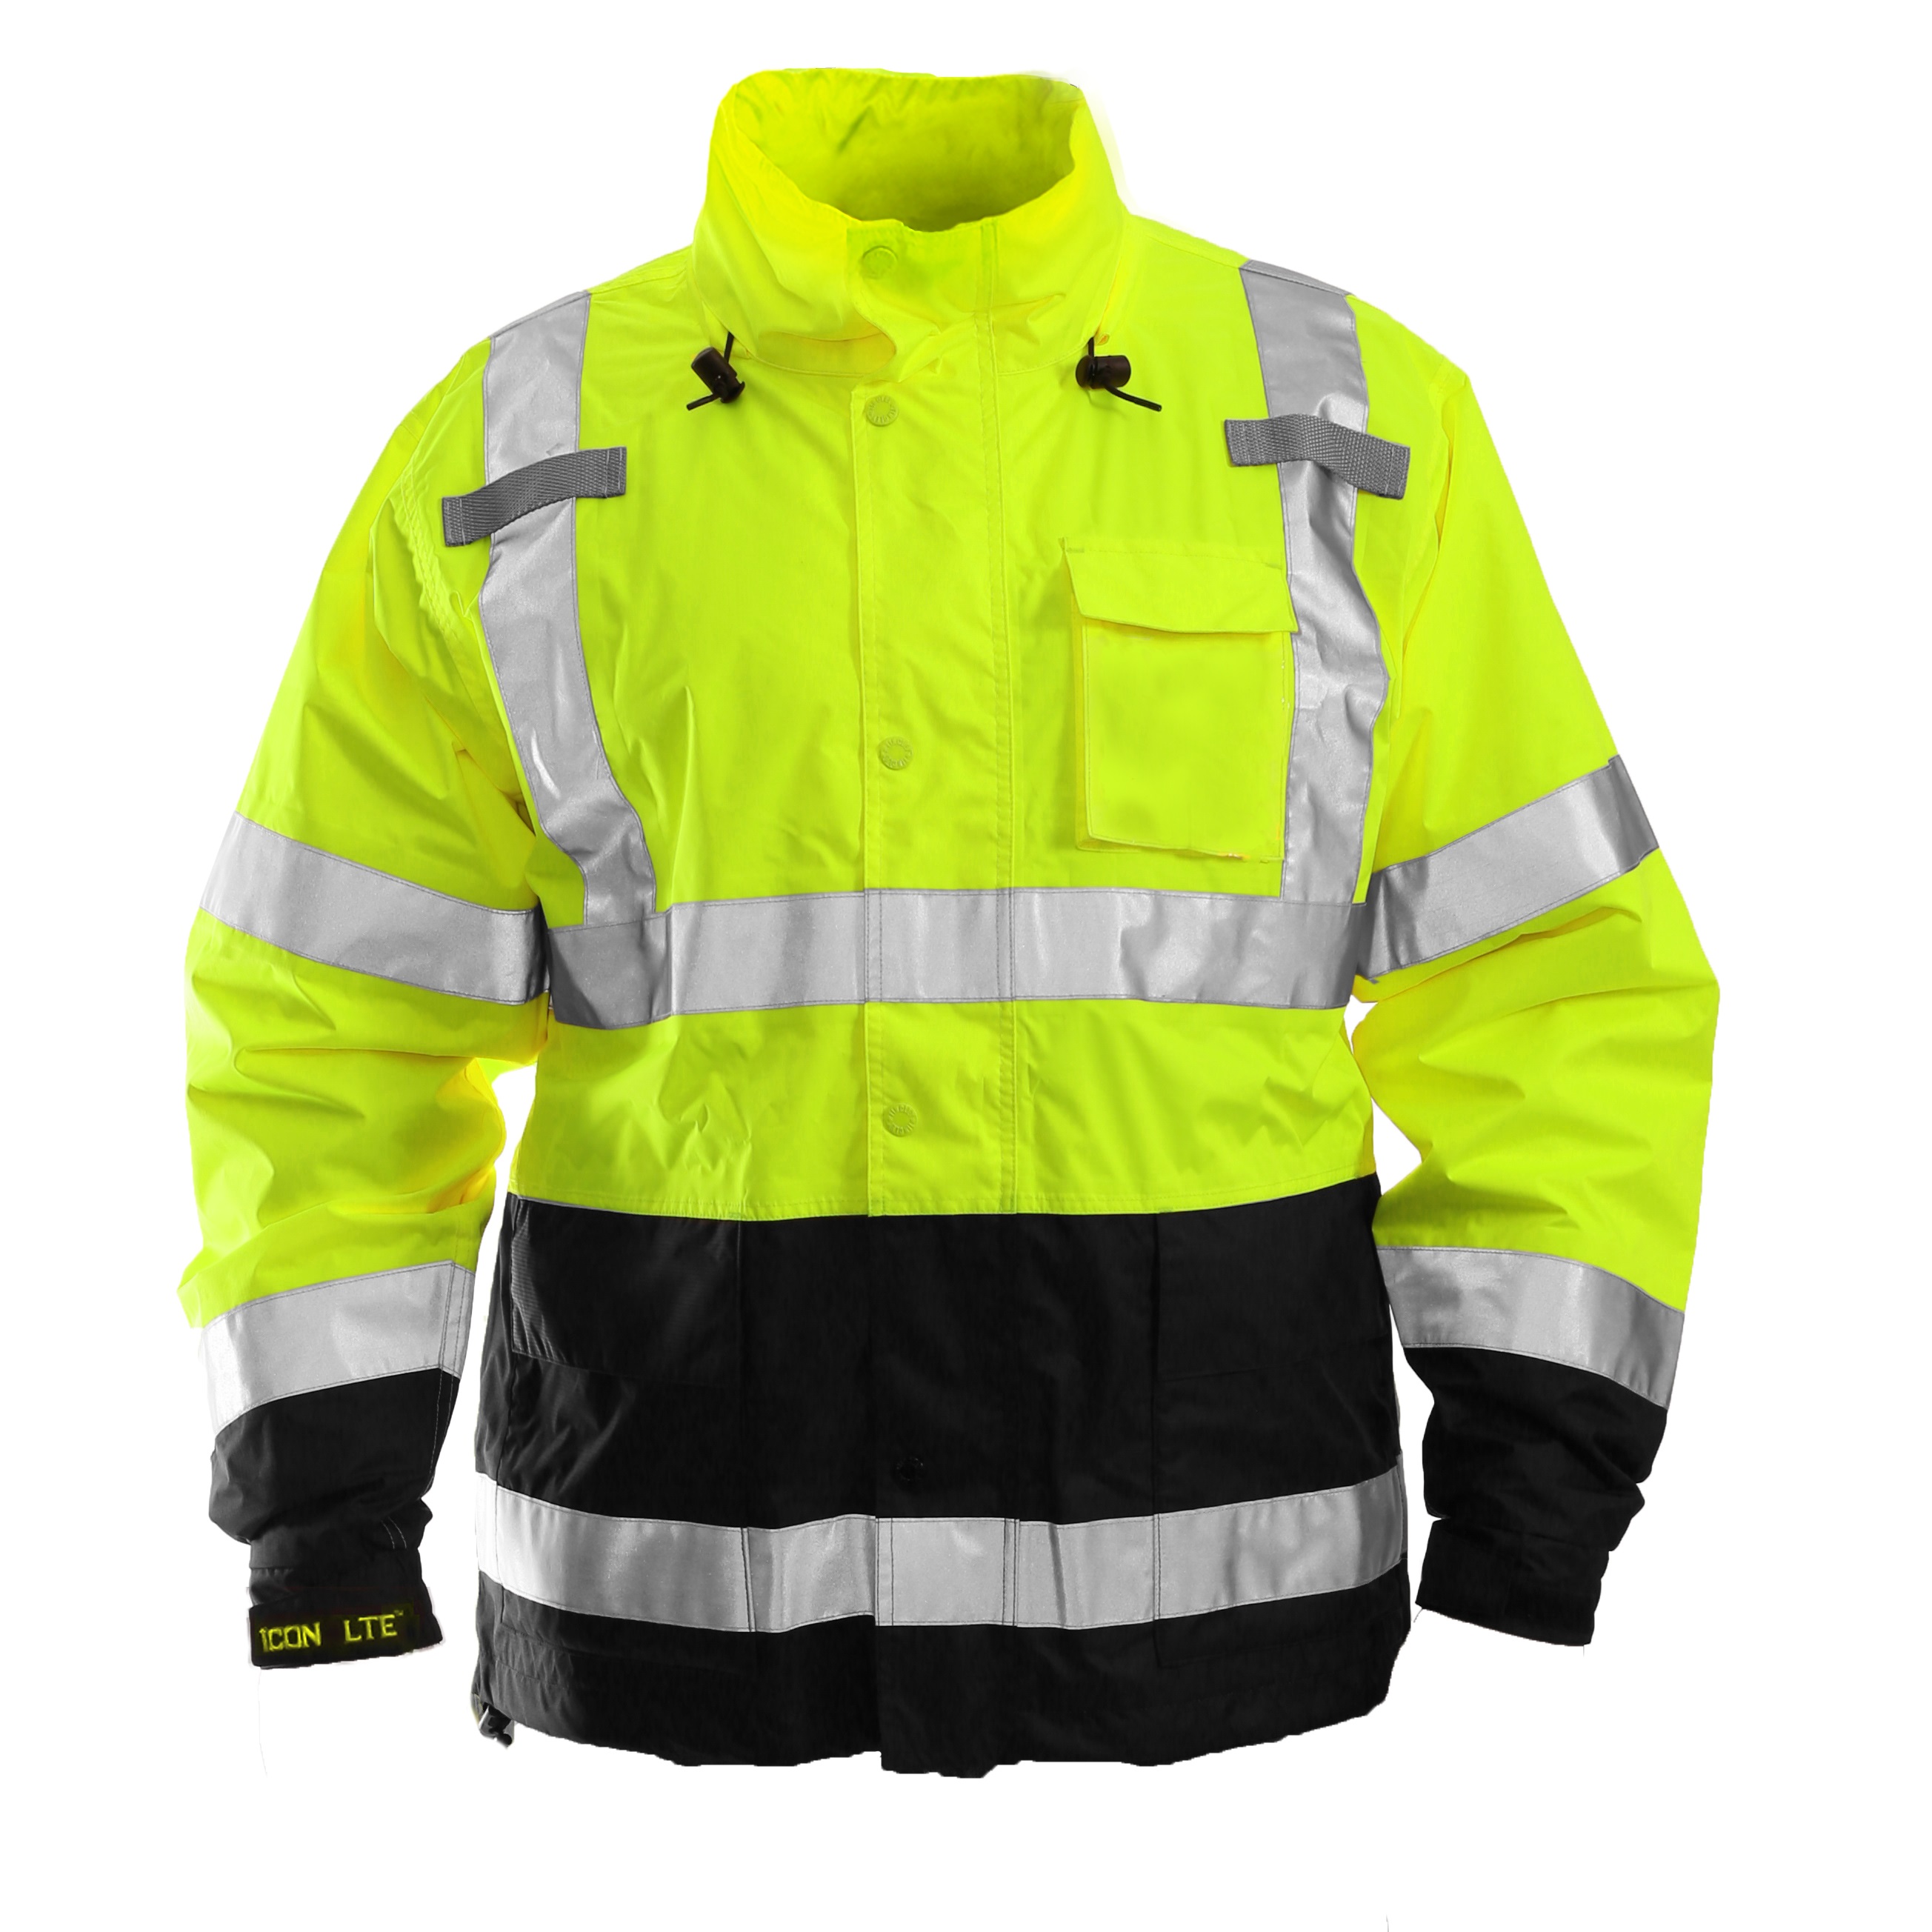 Tingley Icon LTE&trade; 75 Denier Rip Stop Polyester / PU Class 3 Jacket